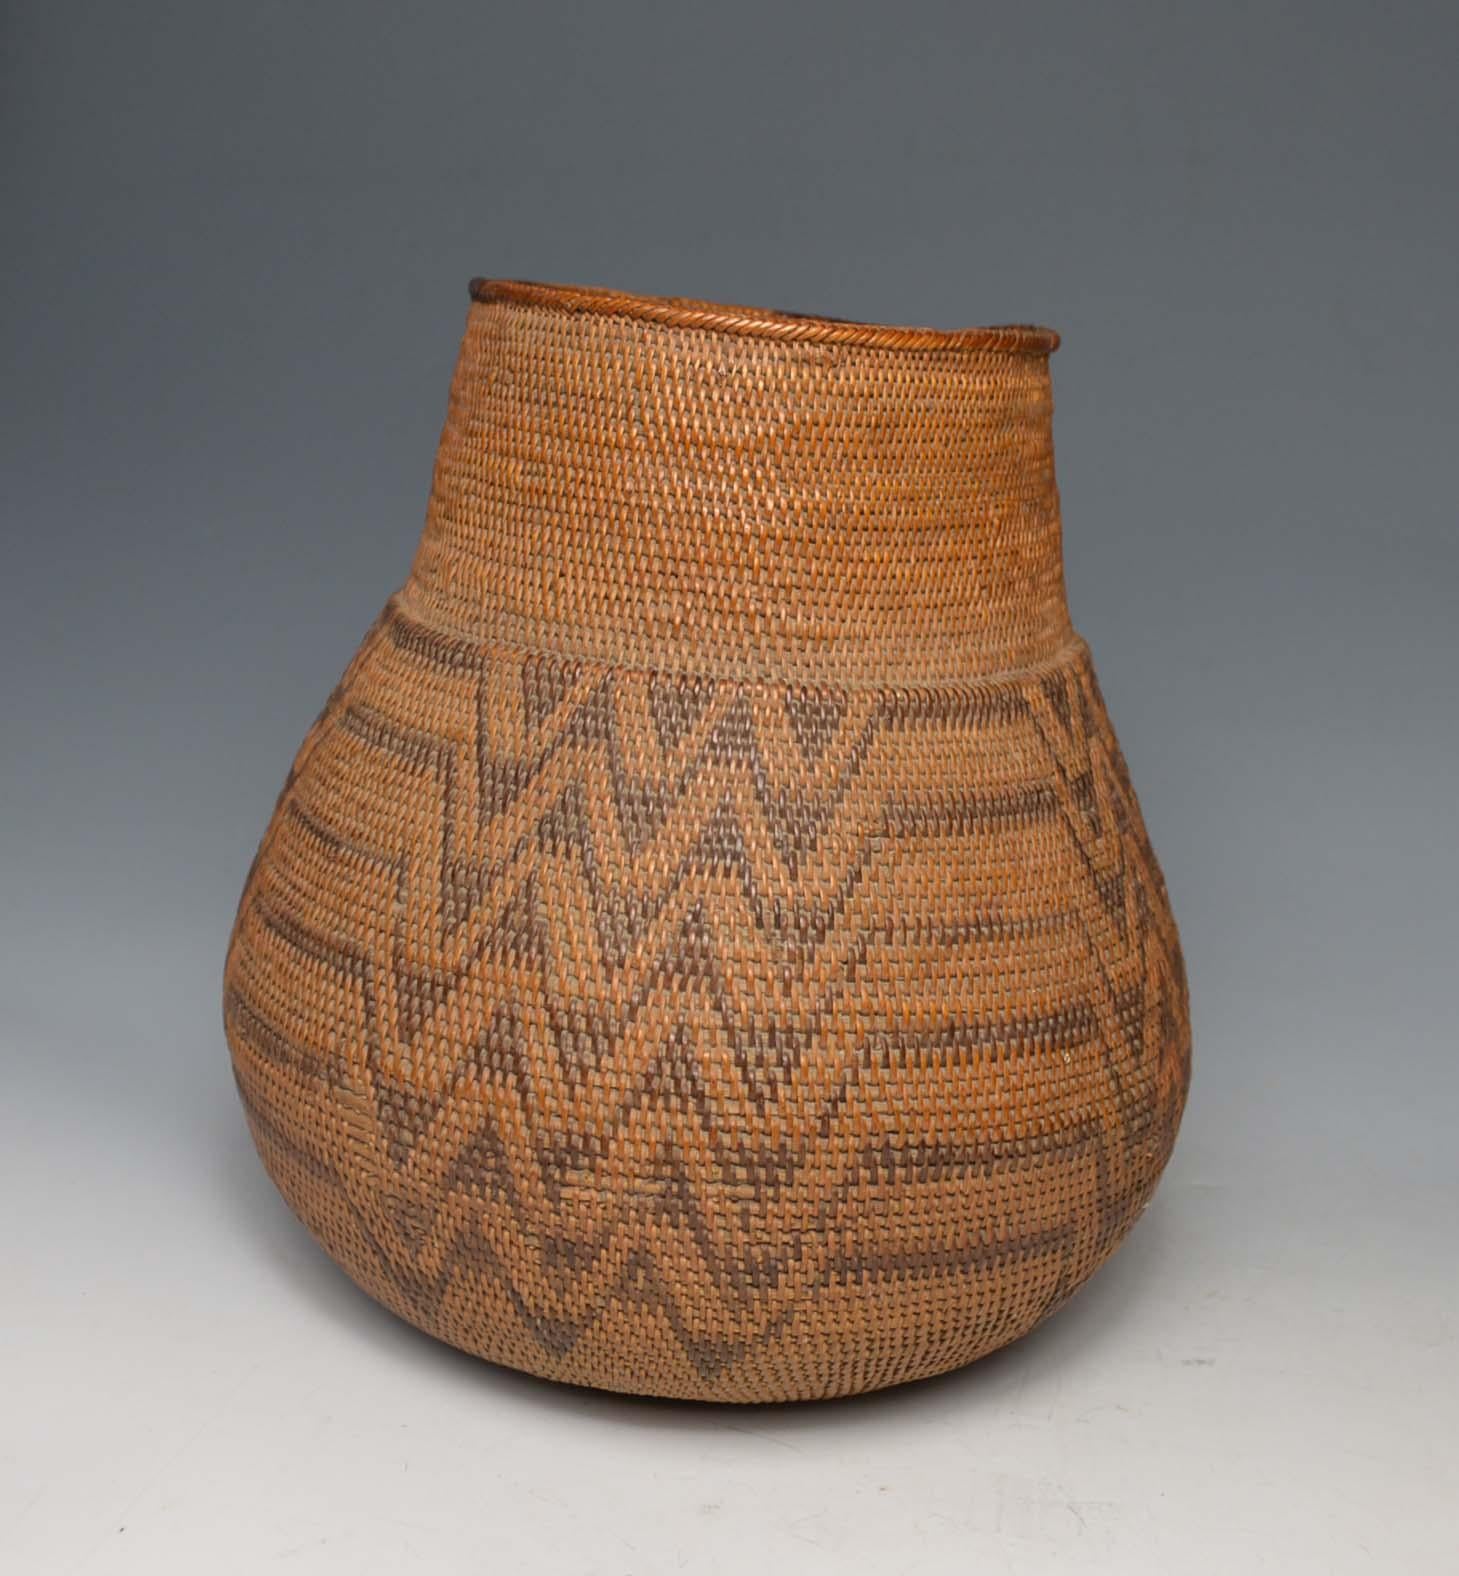 African Tribal Art fine large antique Barotse basket
Very fine large old Ba Rotse basket from Zambia
Period: Early 20th century
Measures: Height 28 cm width 25 cm
Condition: good
Ex Scottish collection.